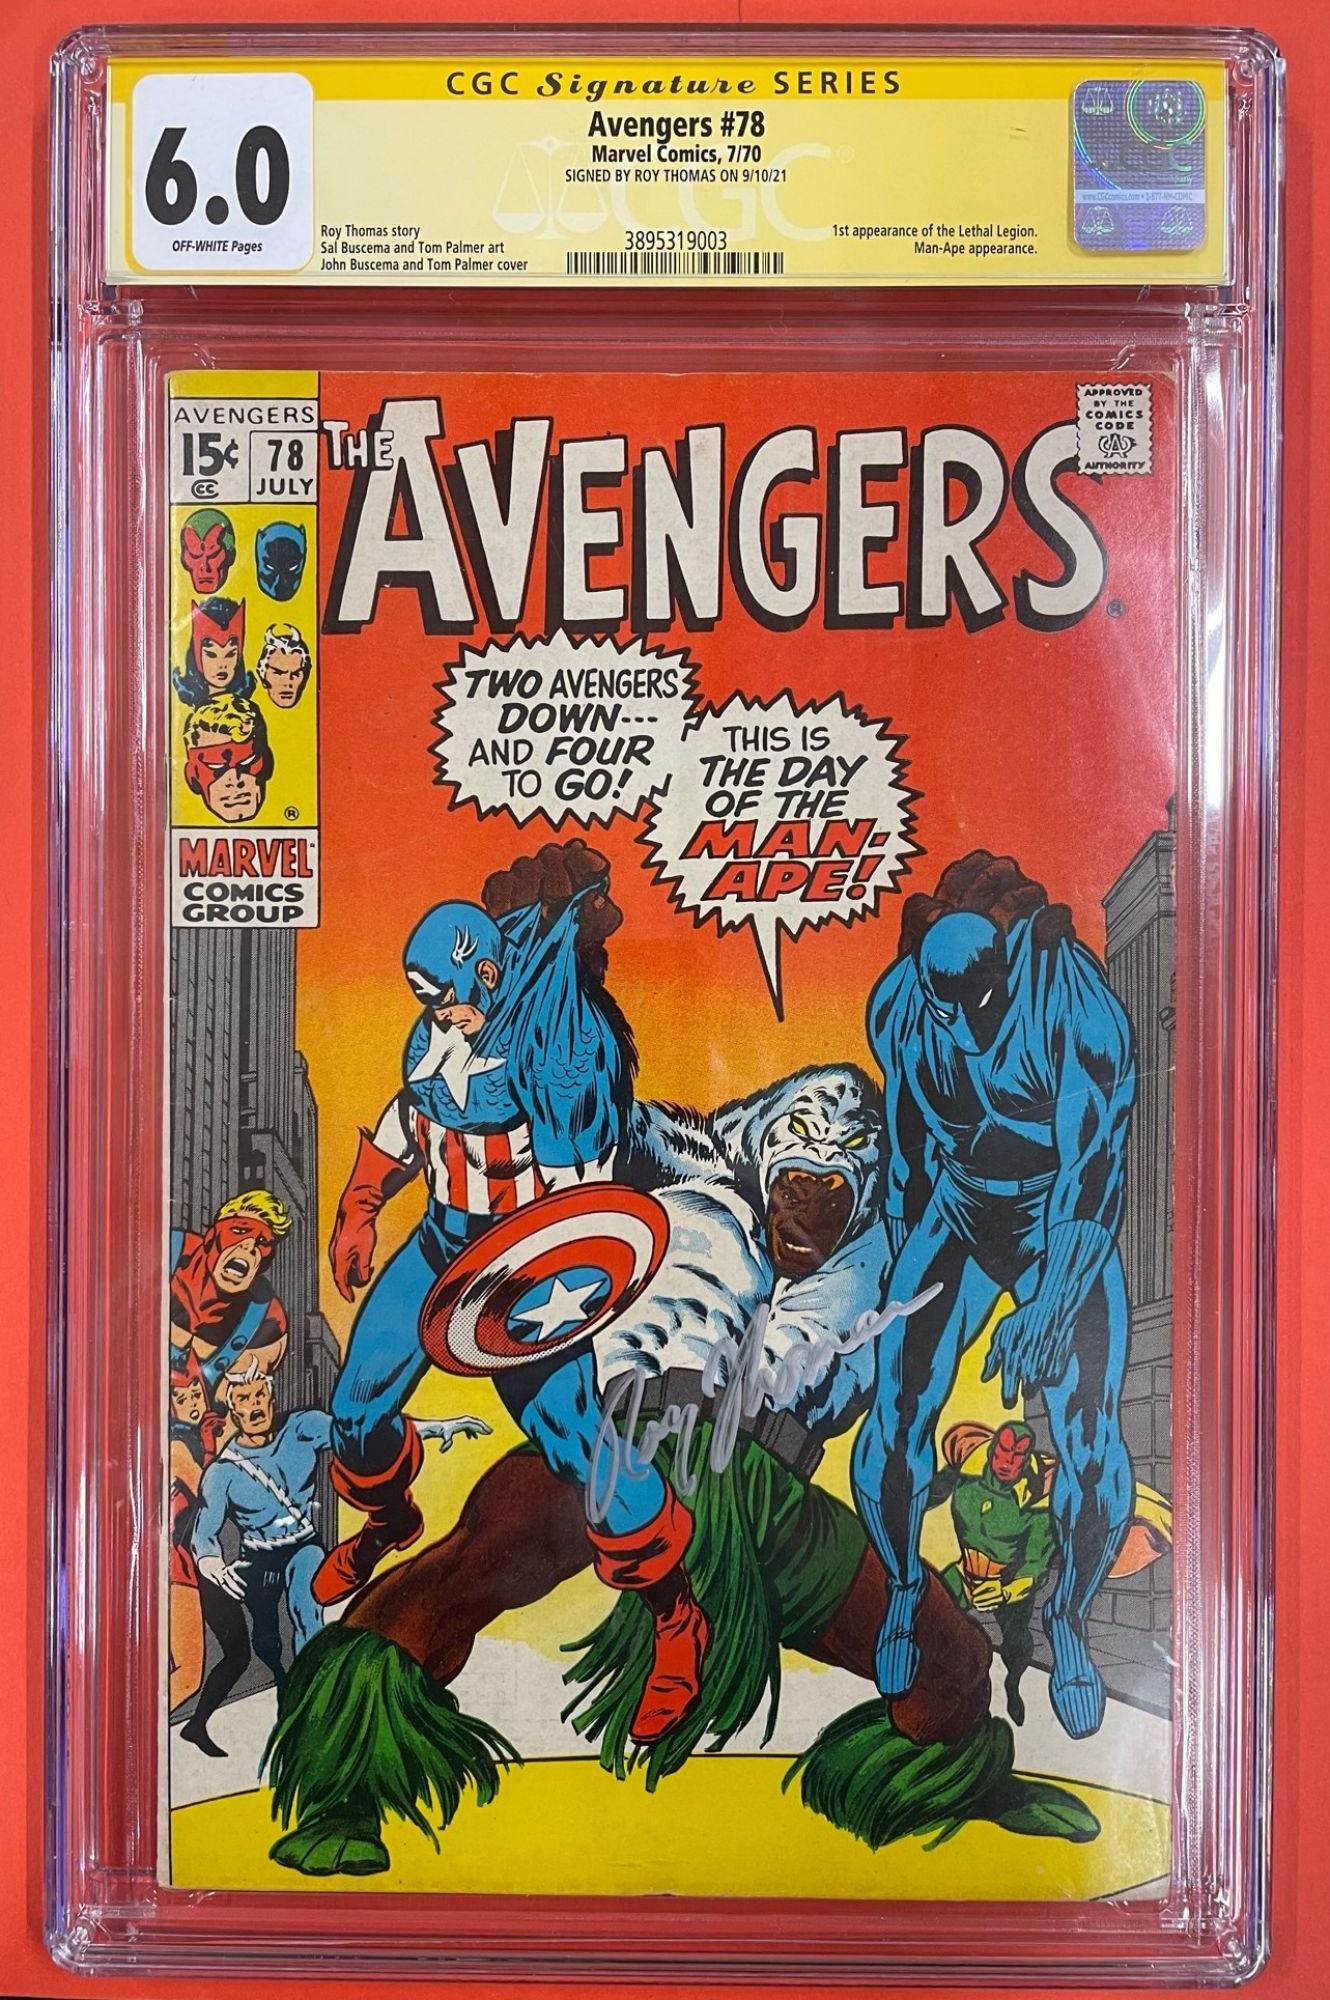 Avengers #78, Jul 1970, 6.0 FN CGC Signed by Roy Thomas